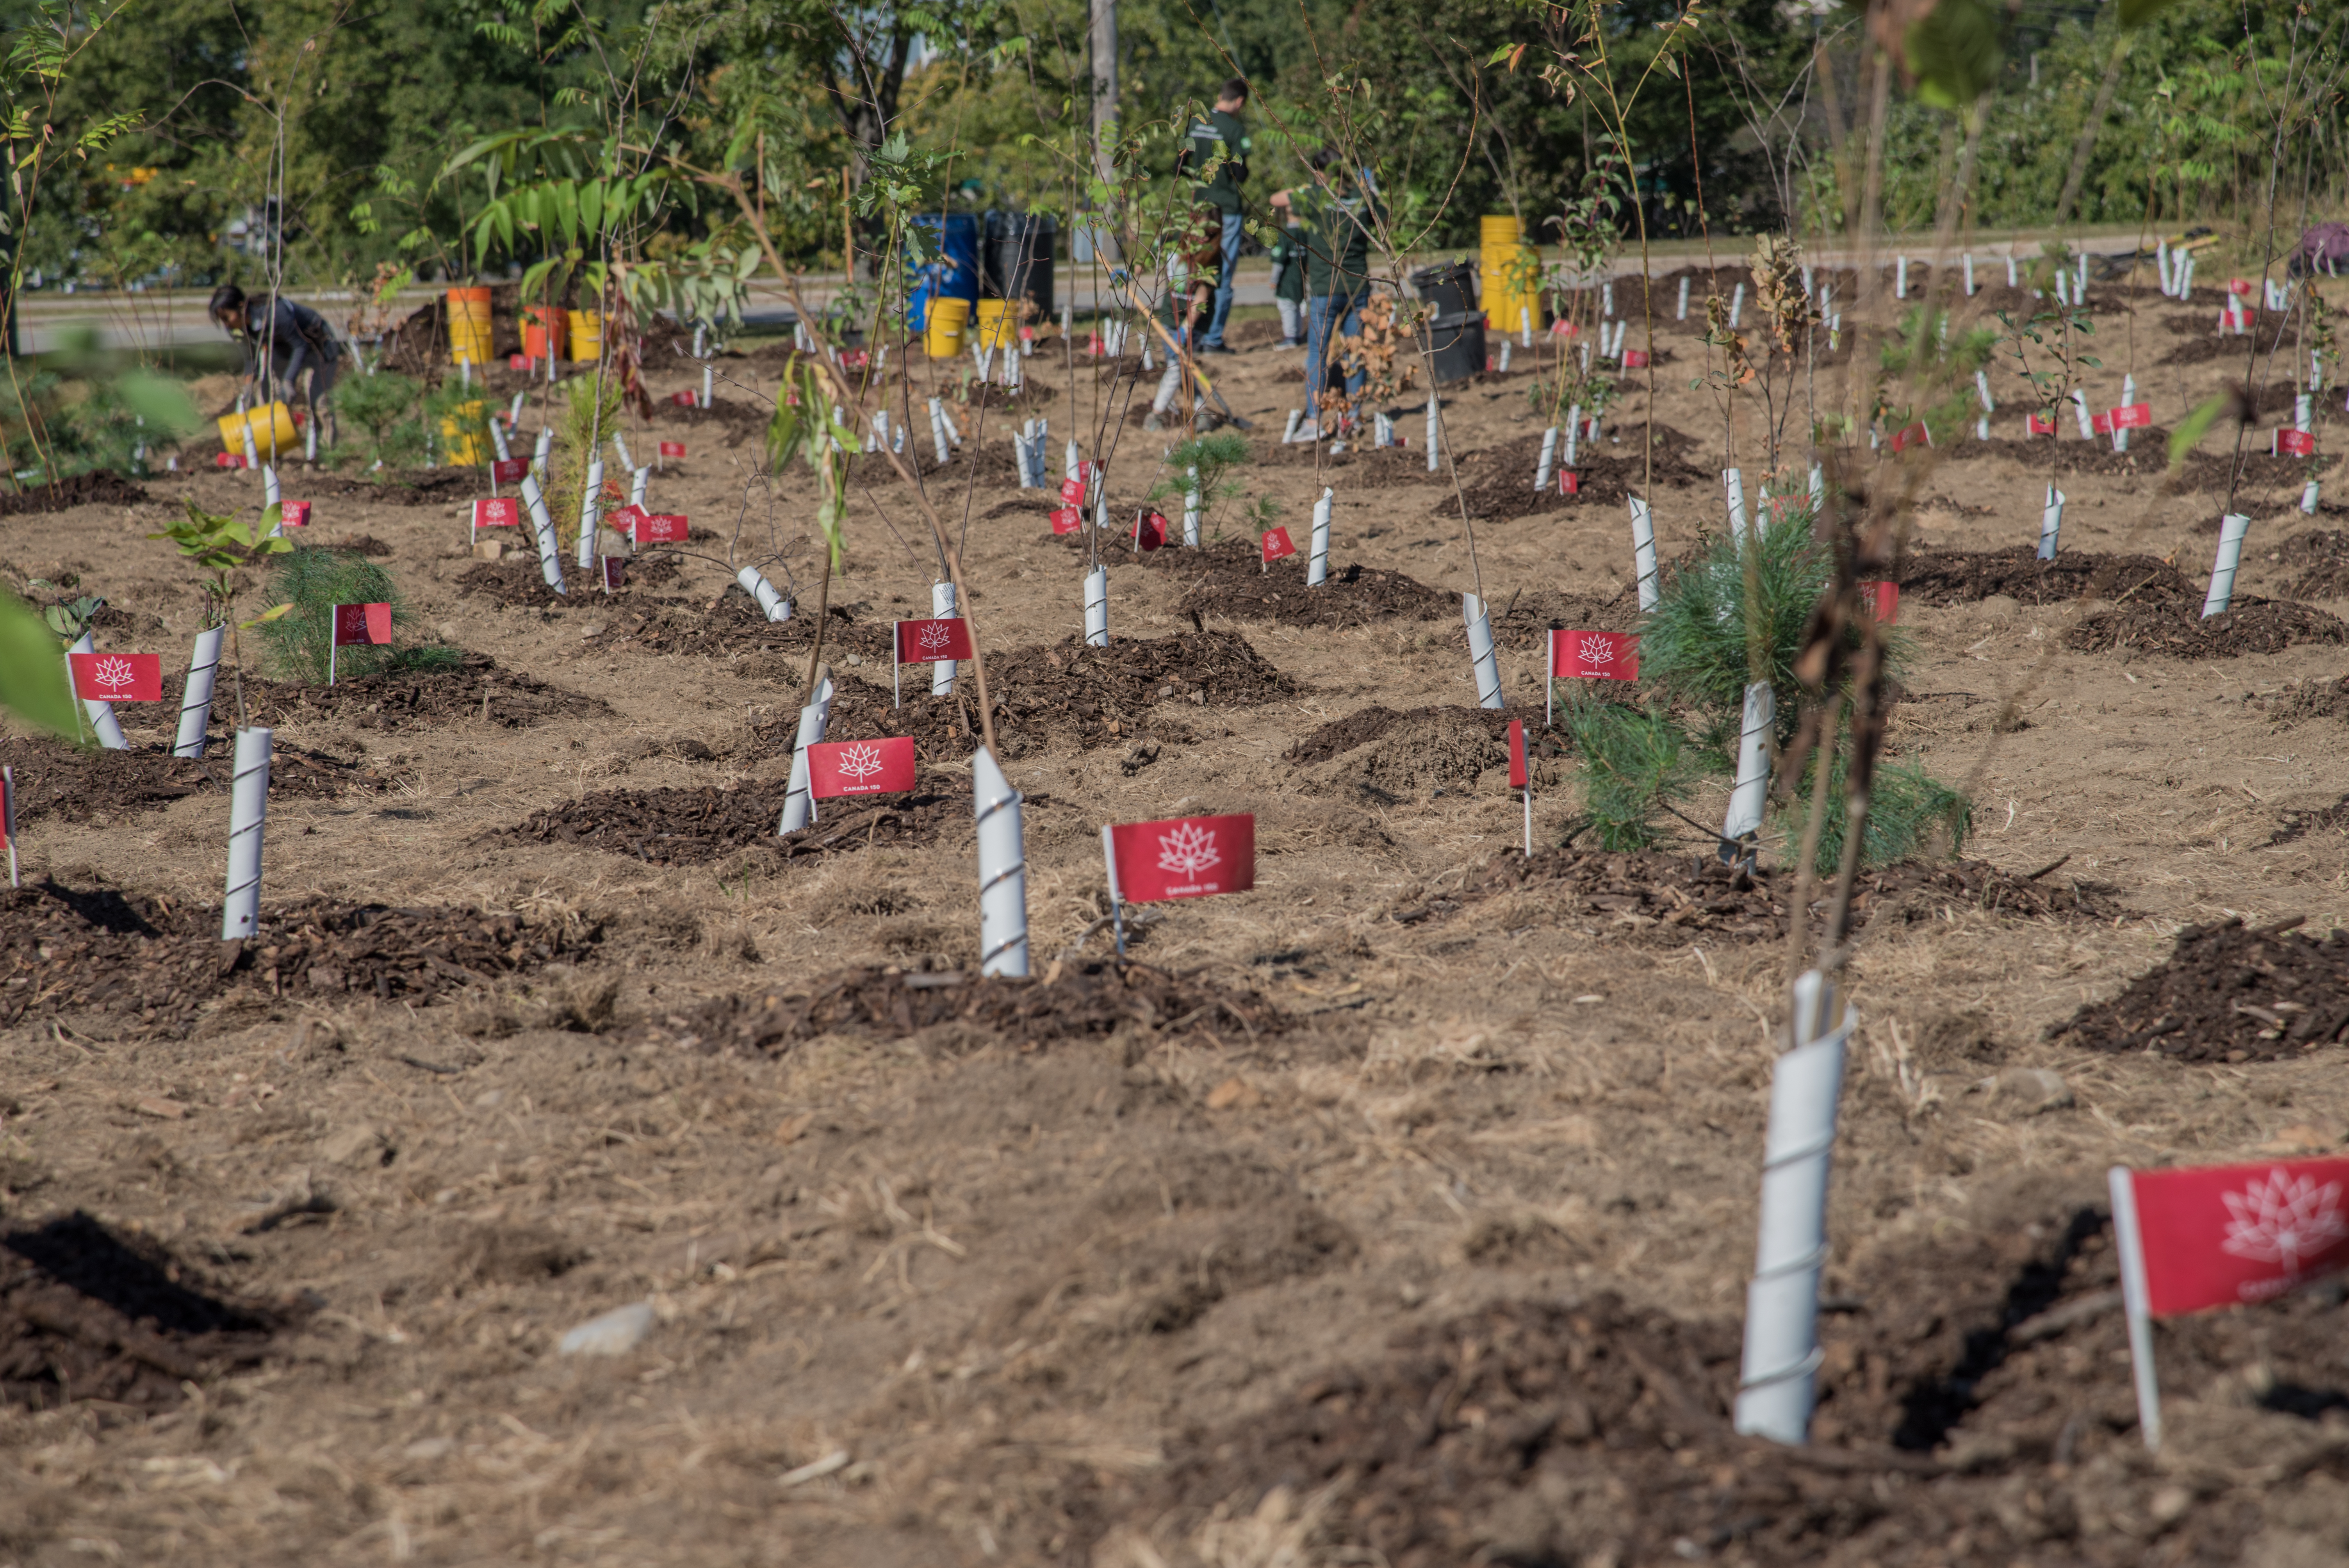 A completed planting site with new trees planted